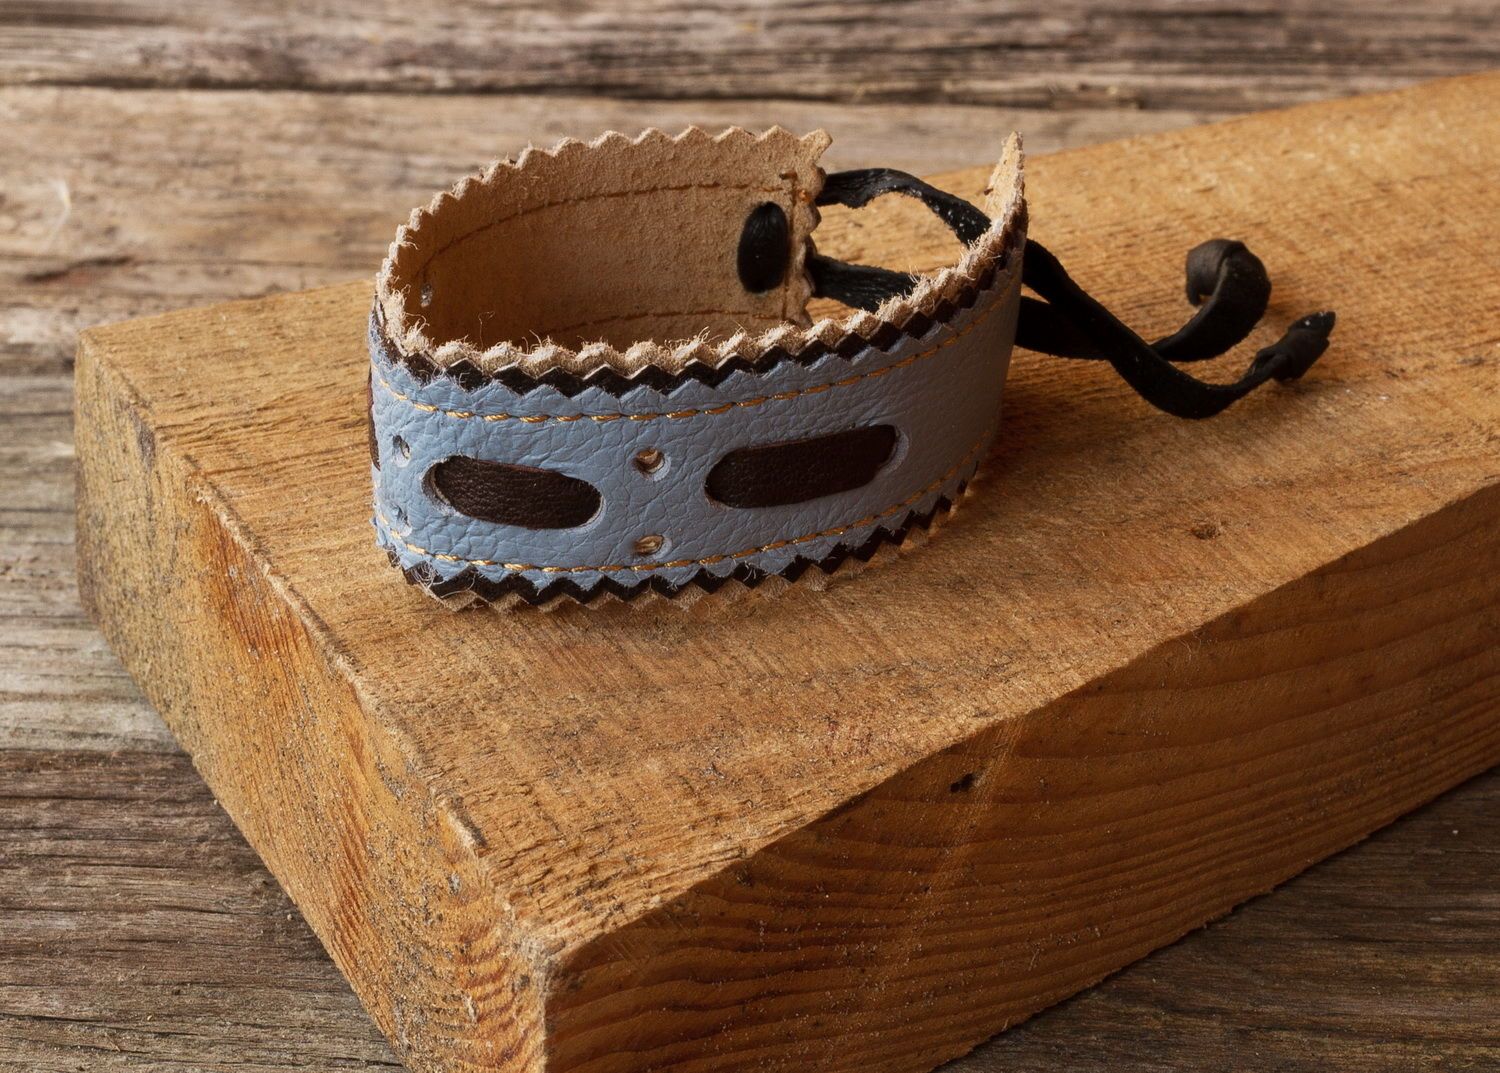 Bracelet made ​​of leather and suede photo 2